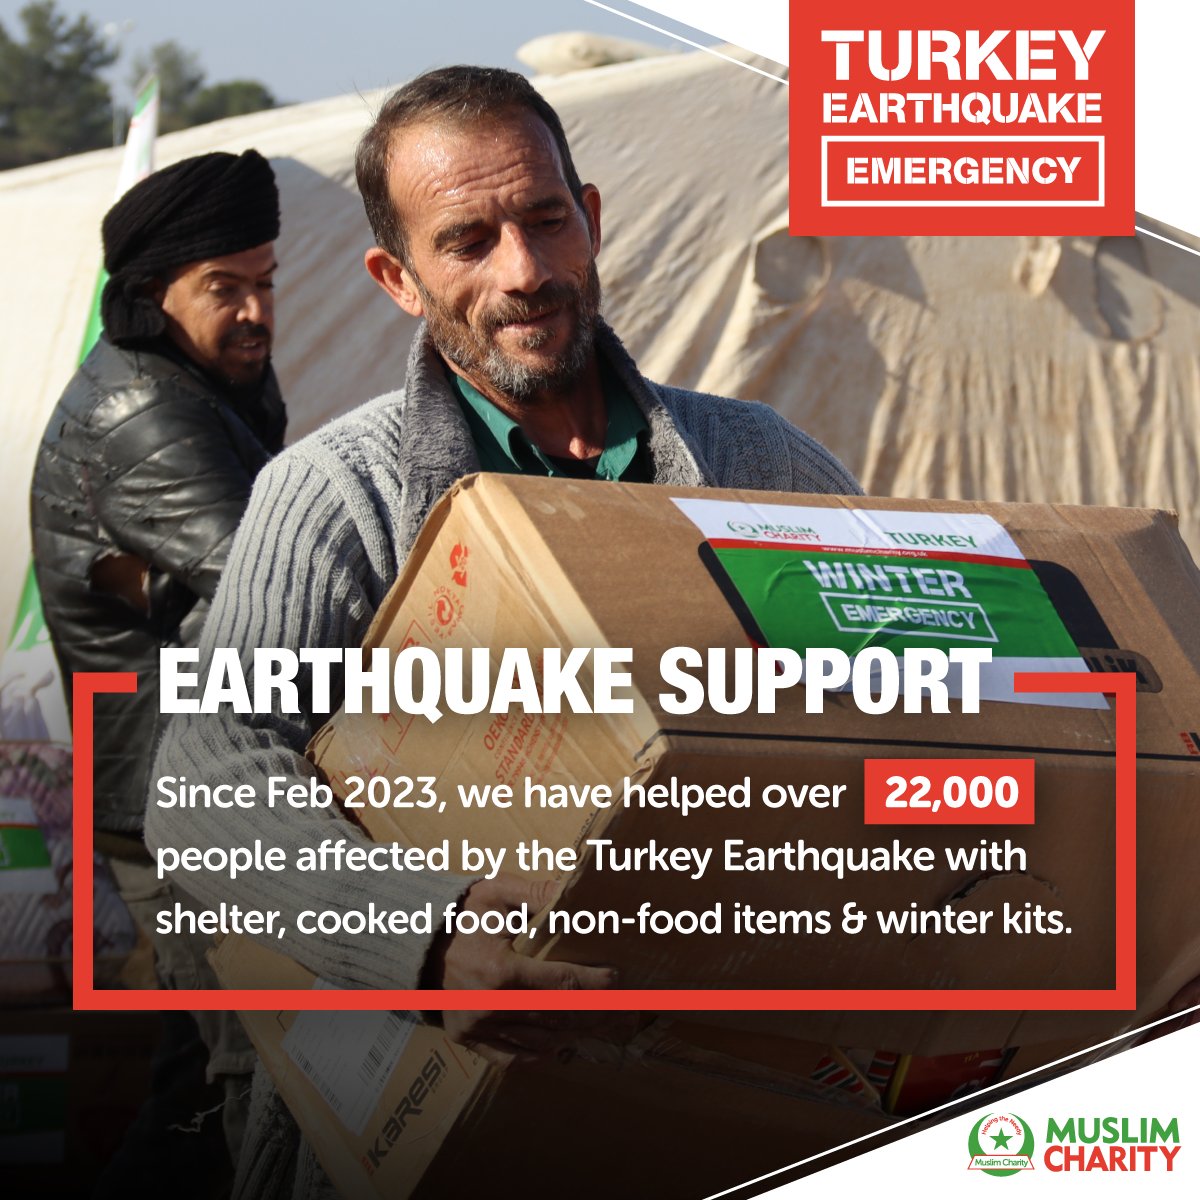 🌍 𝗘𝗔𝗥𝗧𝗛𝗤𝗨𝗔𝗞𝗘 𝗦𝗨𝗣𝗣𝗢𝗥𝗧 🆘 Since February 2023, in the aftermath of the Turkey Earthquake, we've assisted over 22,000 people with shelter, cooked food, non-food items and winter kits. Learn more & help us continue our support by visiting: muslimcharity.org.uk/turkey